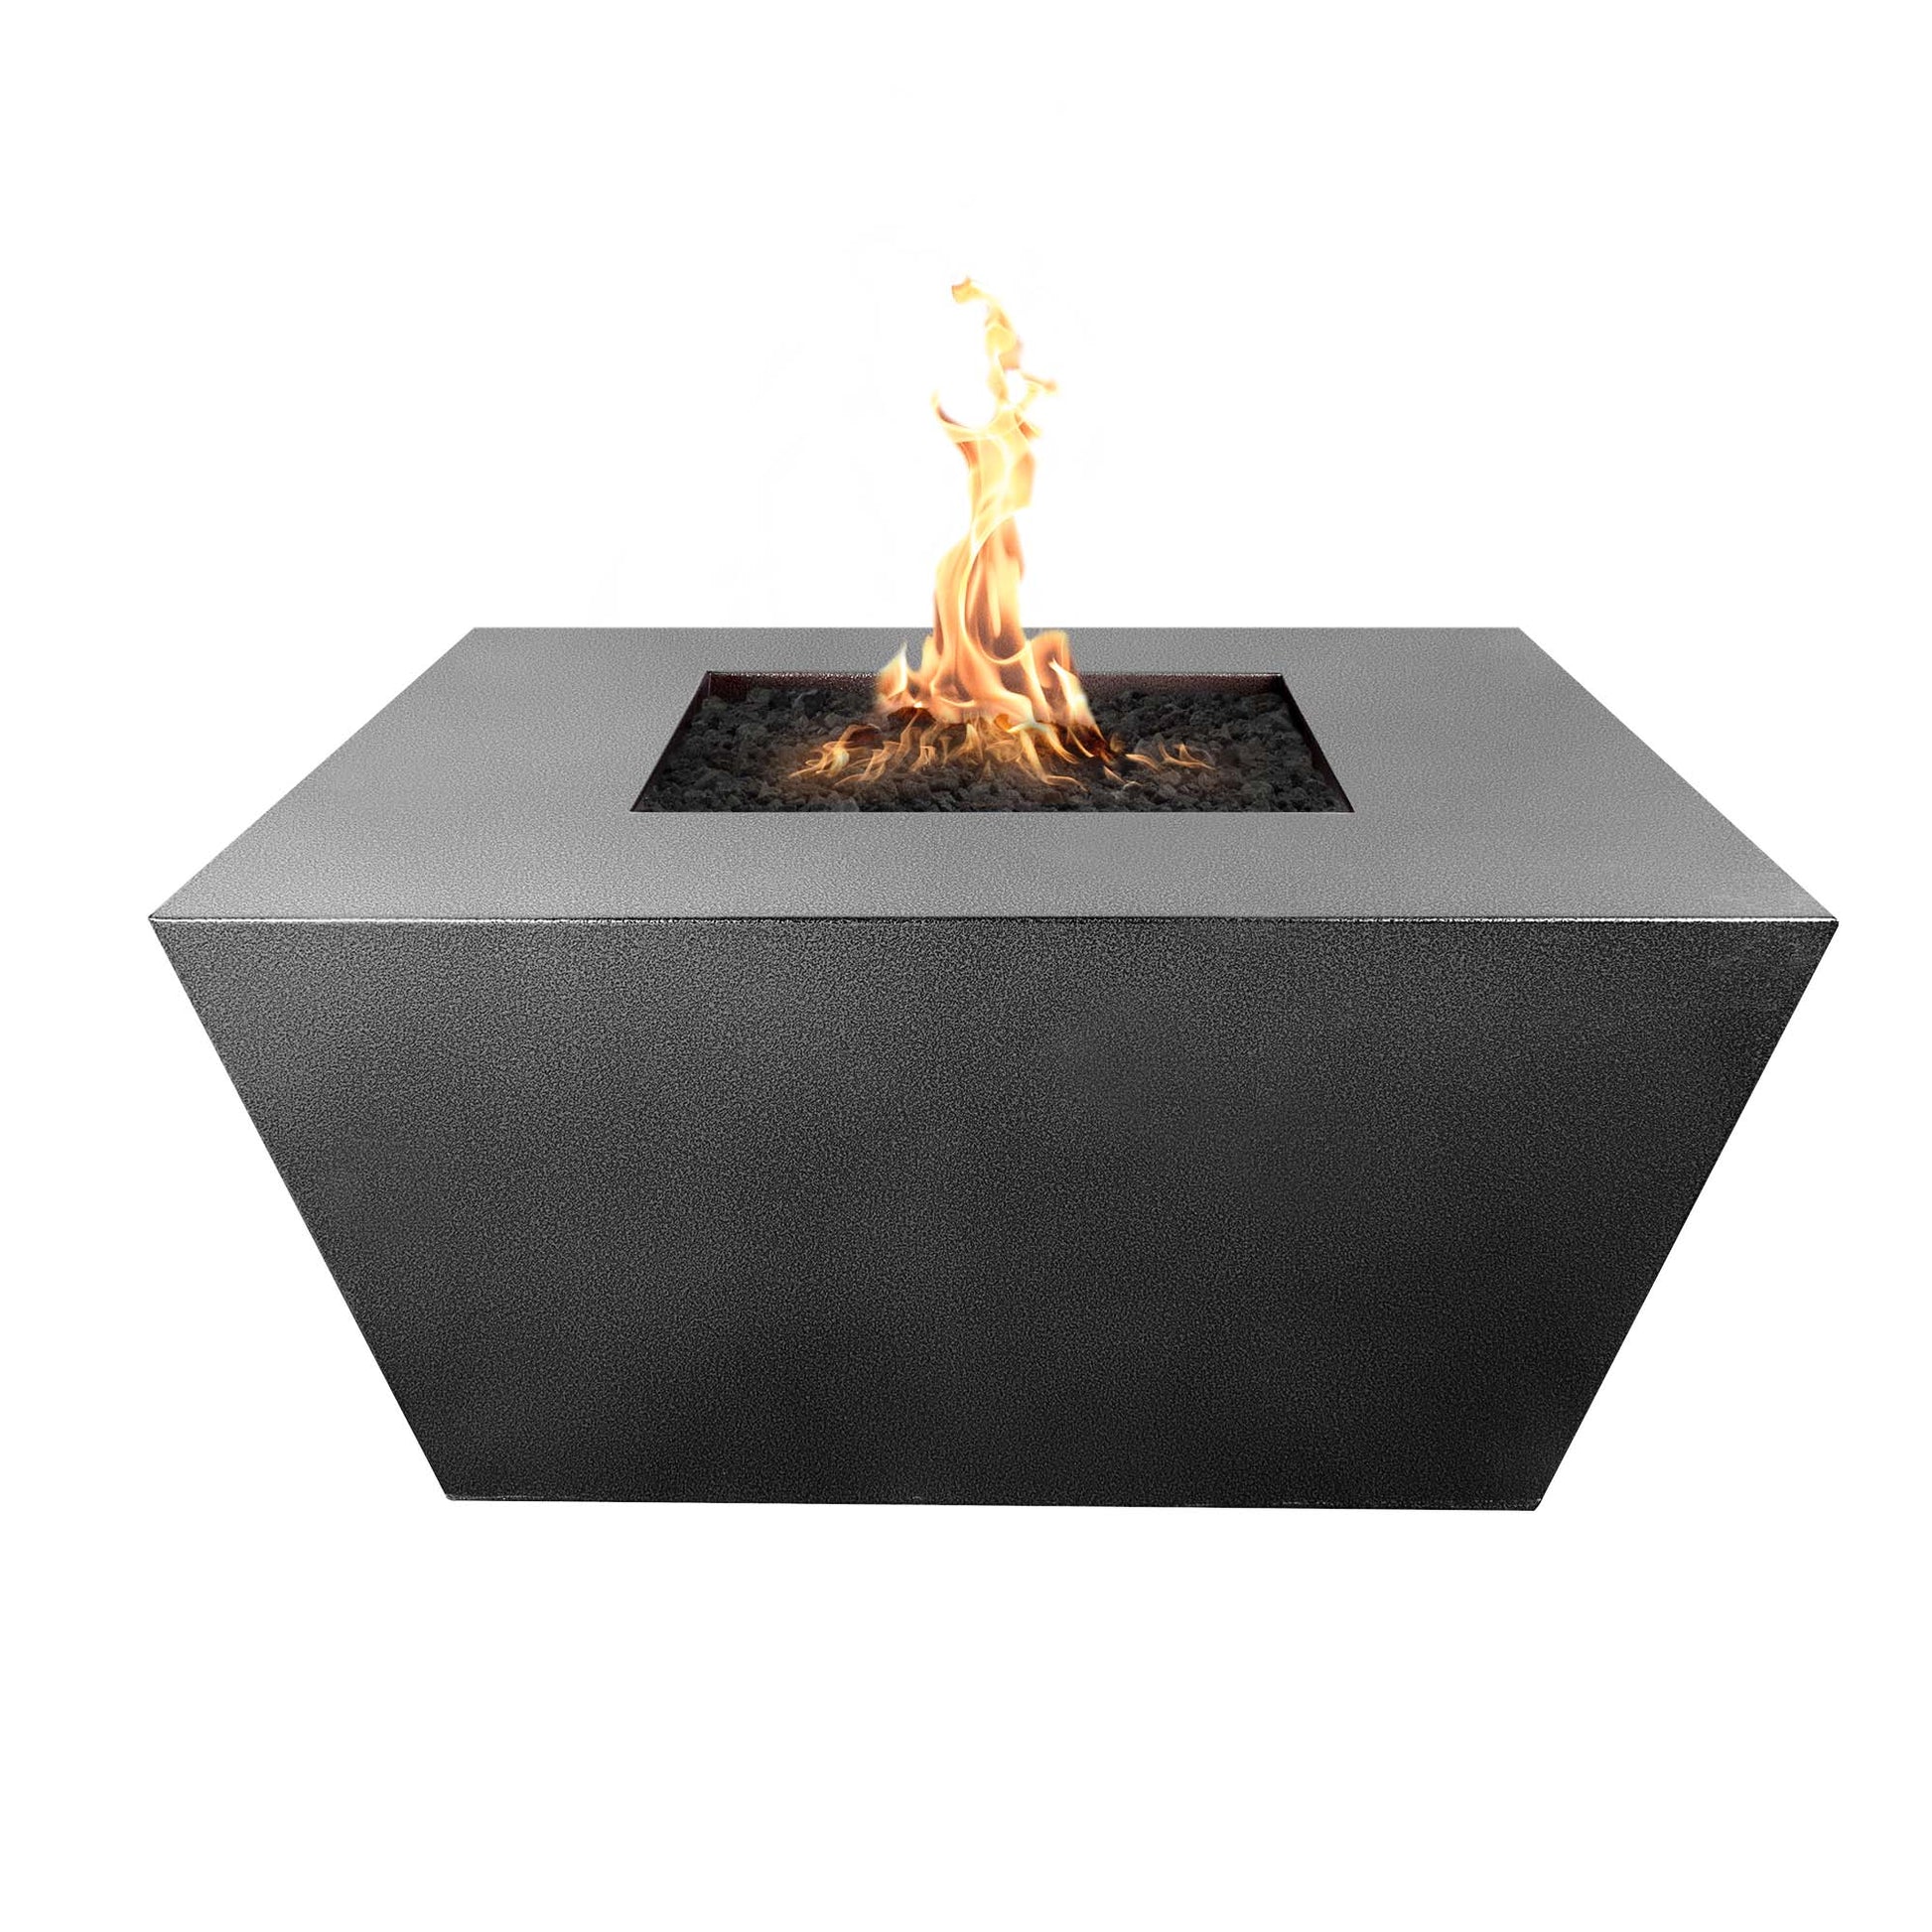 The Outdoor Plus Square Redan 48" Black Powder Coated Metal Liquid Propane Fire Pit with 110V Electronic Ignition